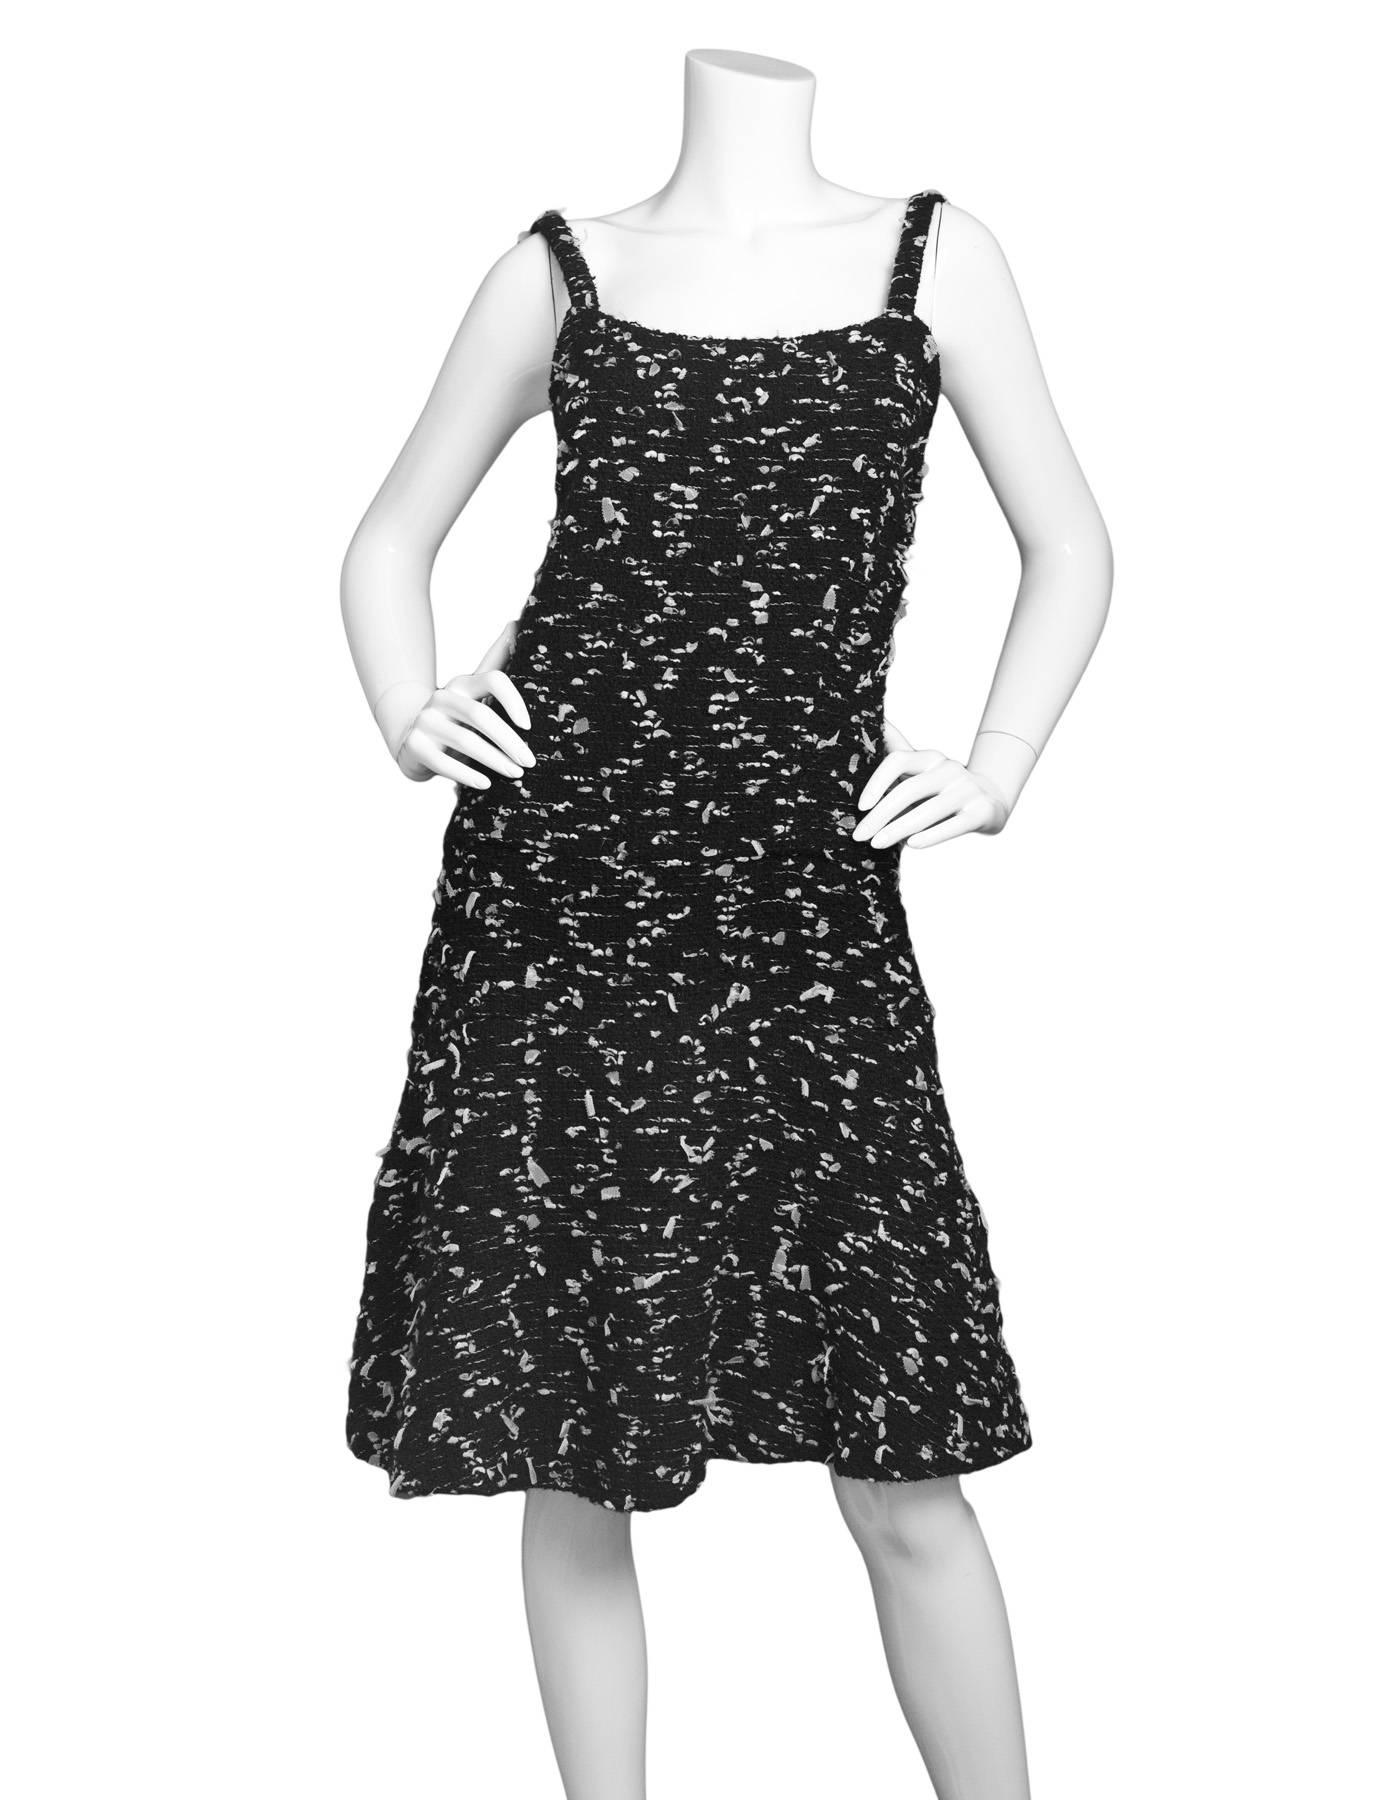 Chanel Black Tweed Sleeveless Dress

Made In: France
Year of Production: 2002
Color: Black
Composition: 72% Wool, 8% Nylon, 8% Acrylic, 7% Rayon, 3% Polyethylene, 90% Silk 10%
Lining: Black, 90% Silk 10% Spandex
Closure/opening: Back center zip